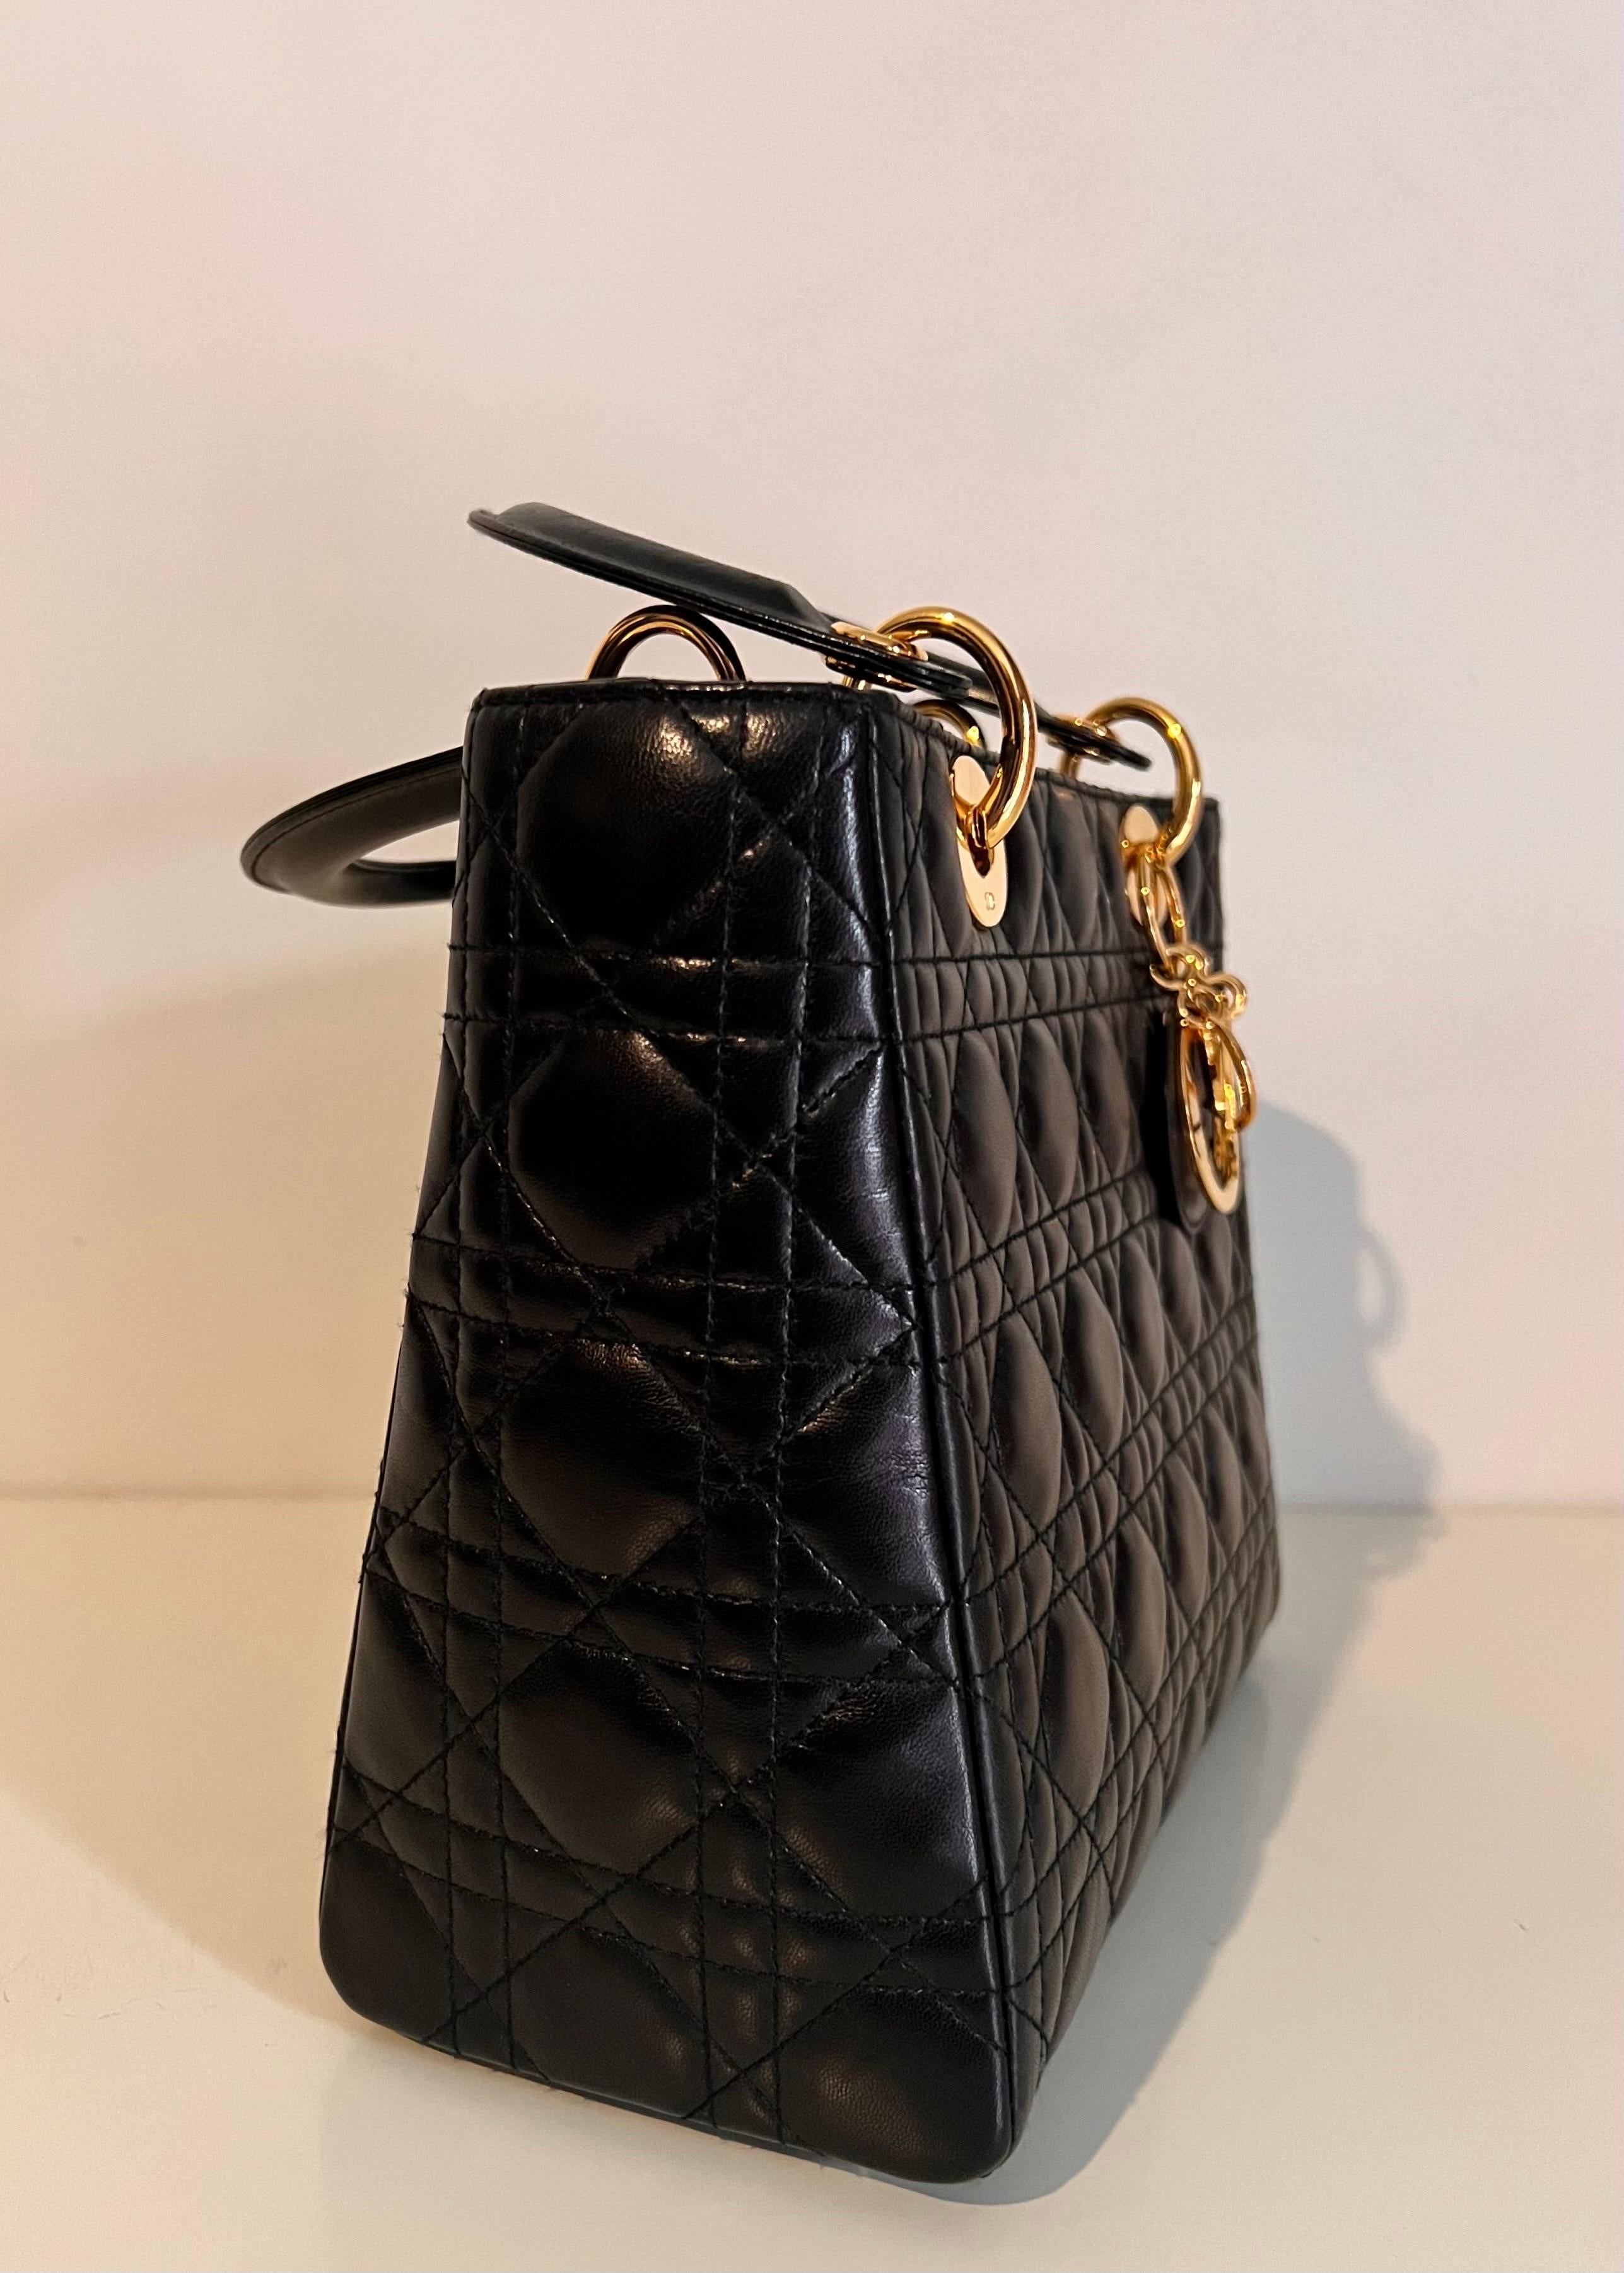 Lady DIOR quilted handbag with gold hardware, famously worn by Princess Diana  11